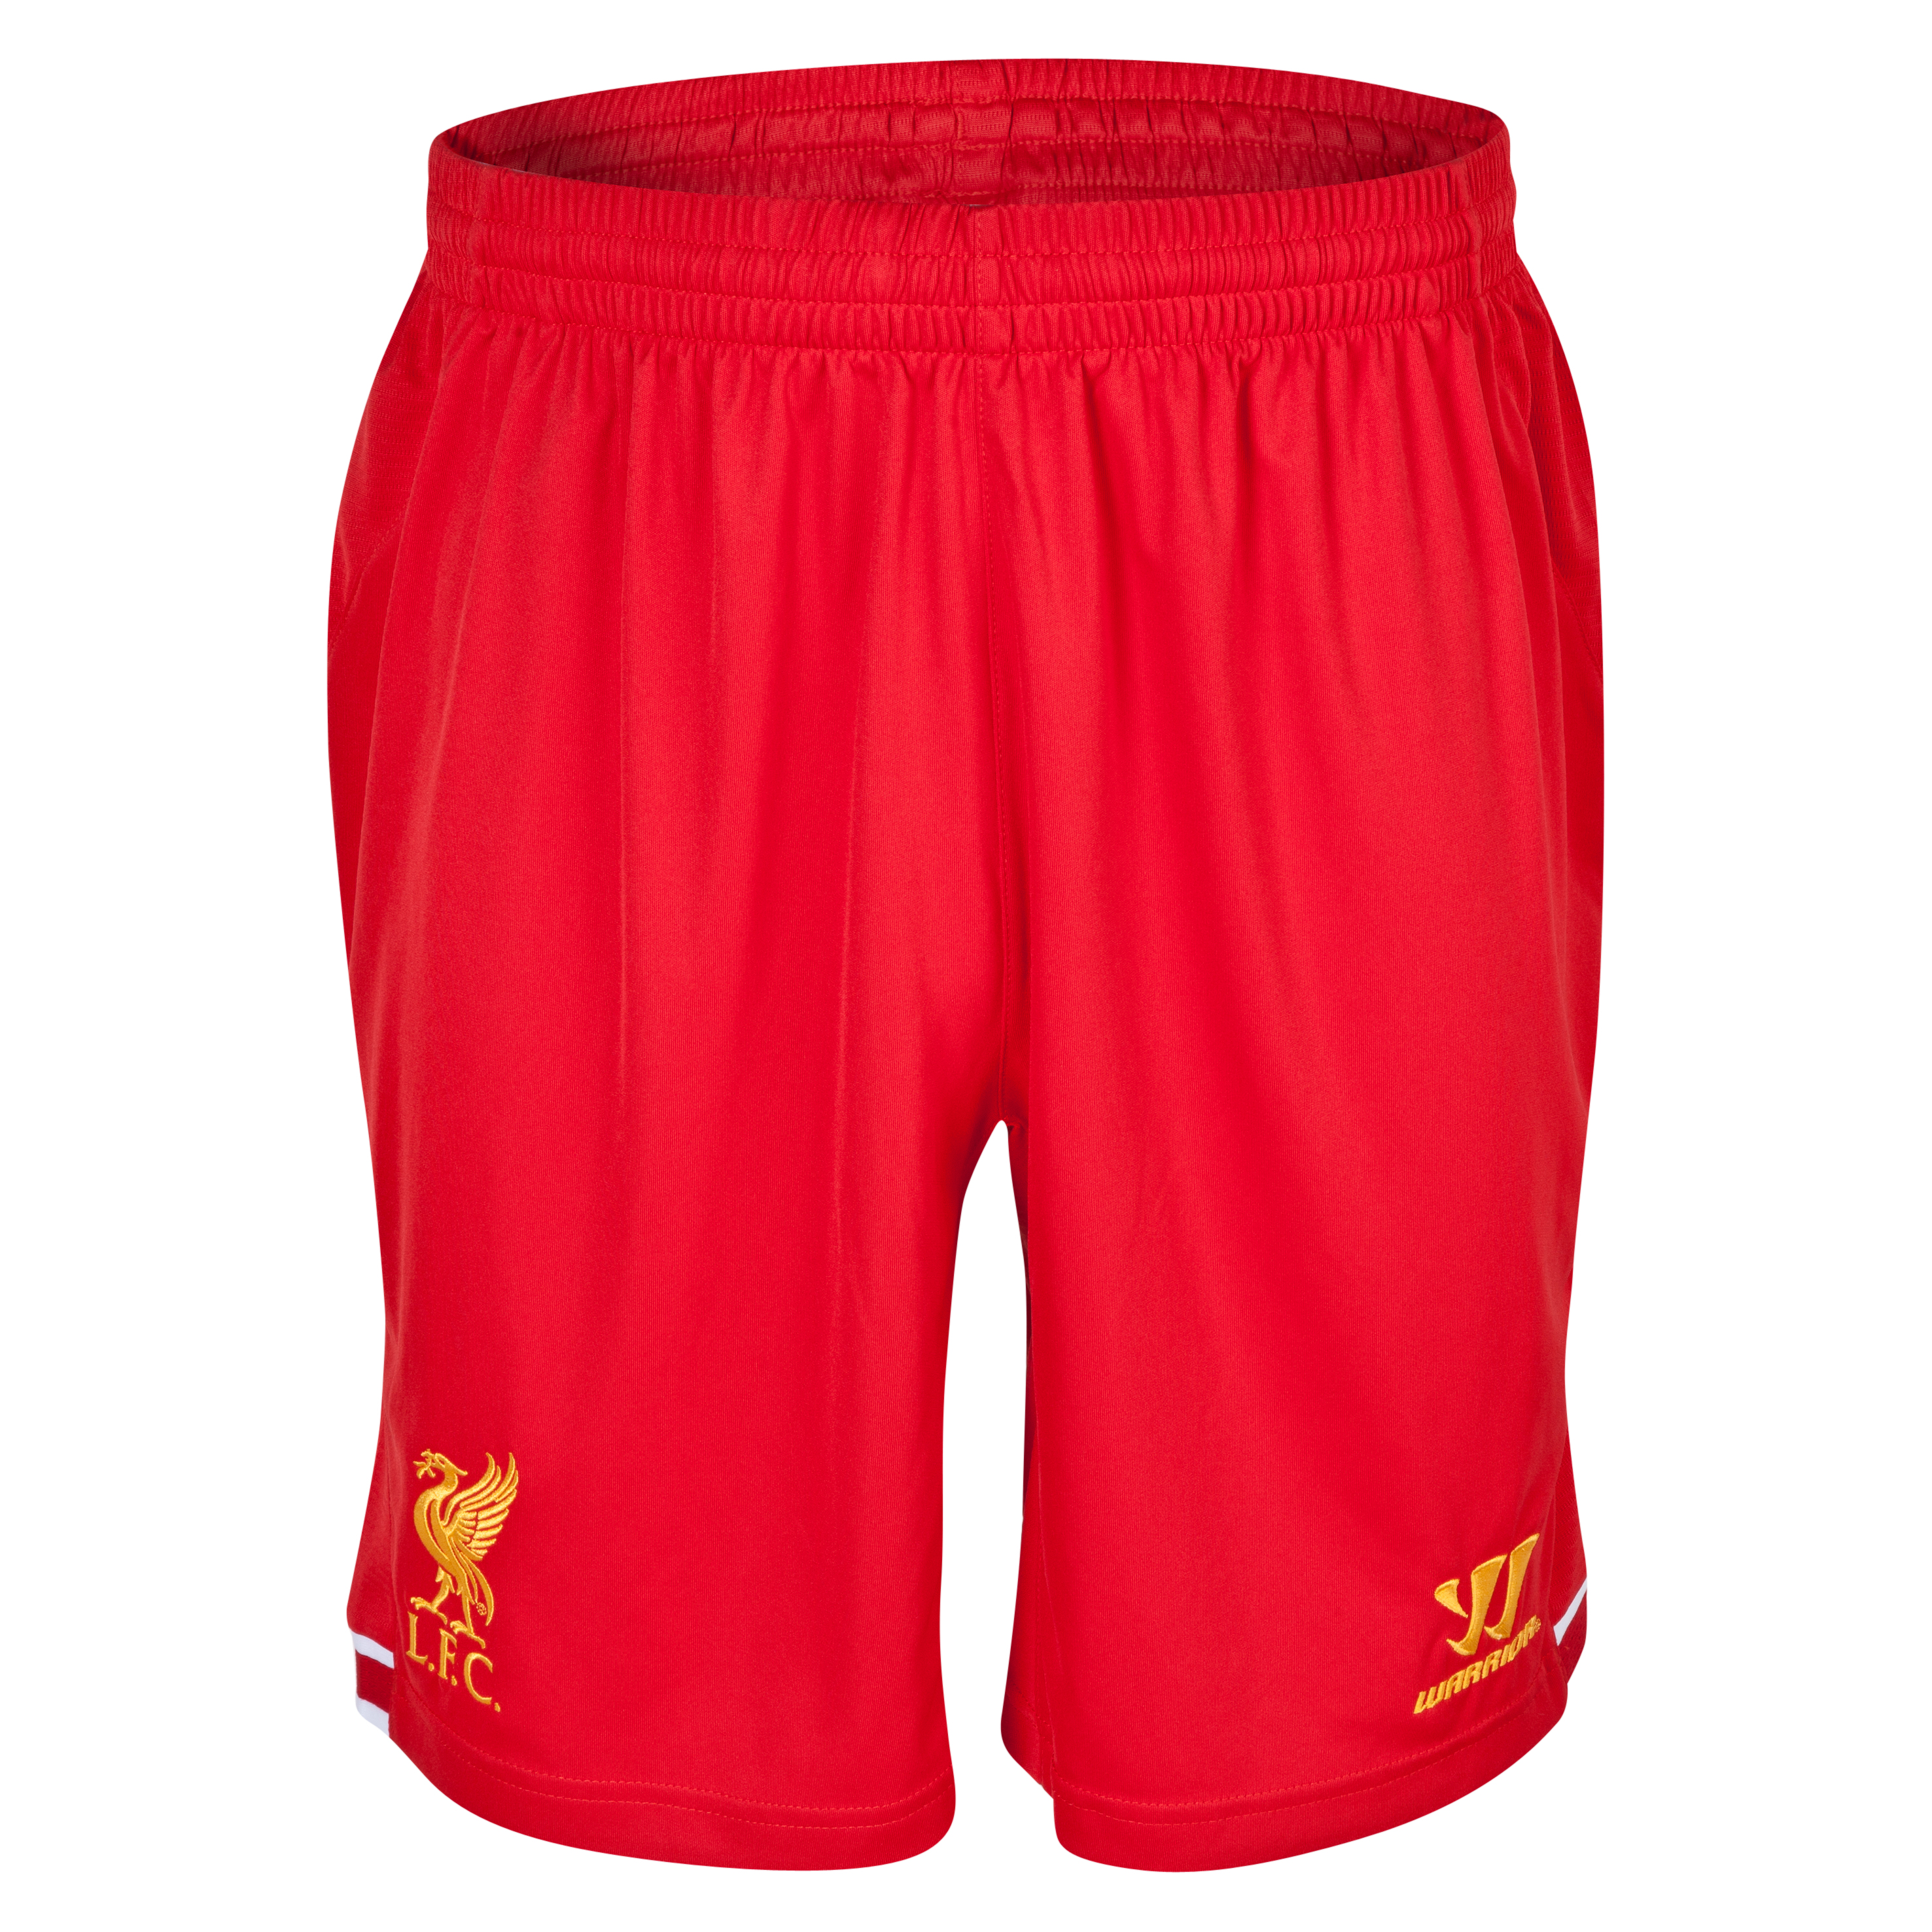 Liverpool Home Shorts 2013/14